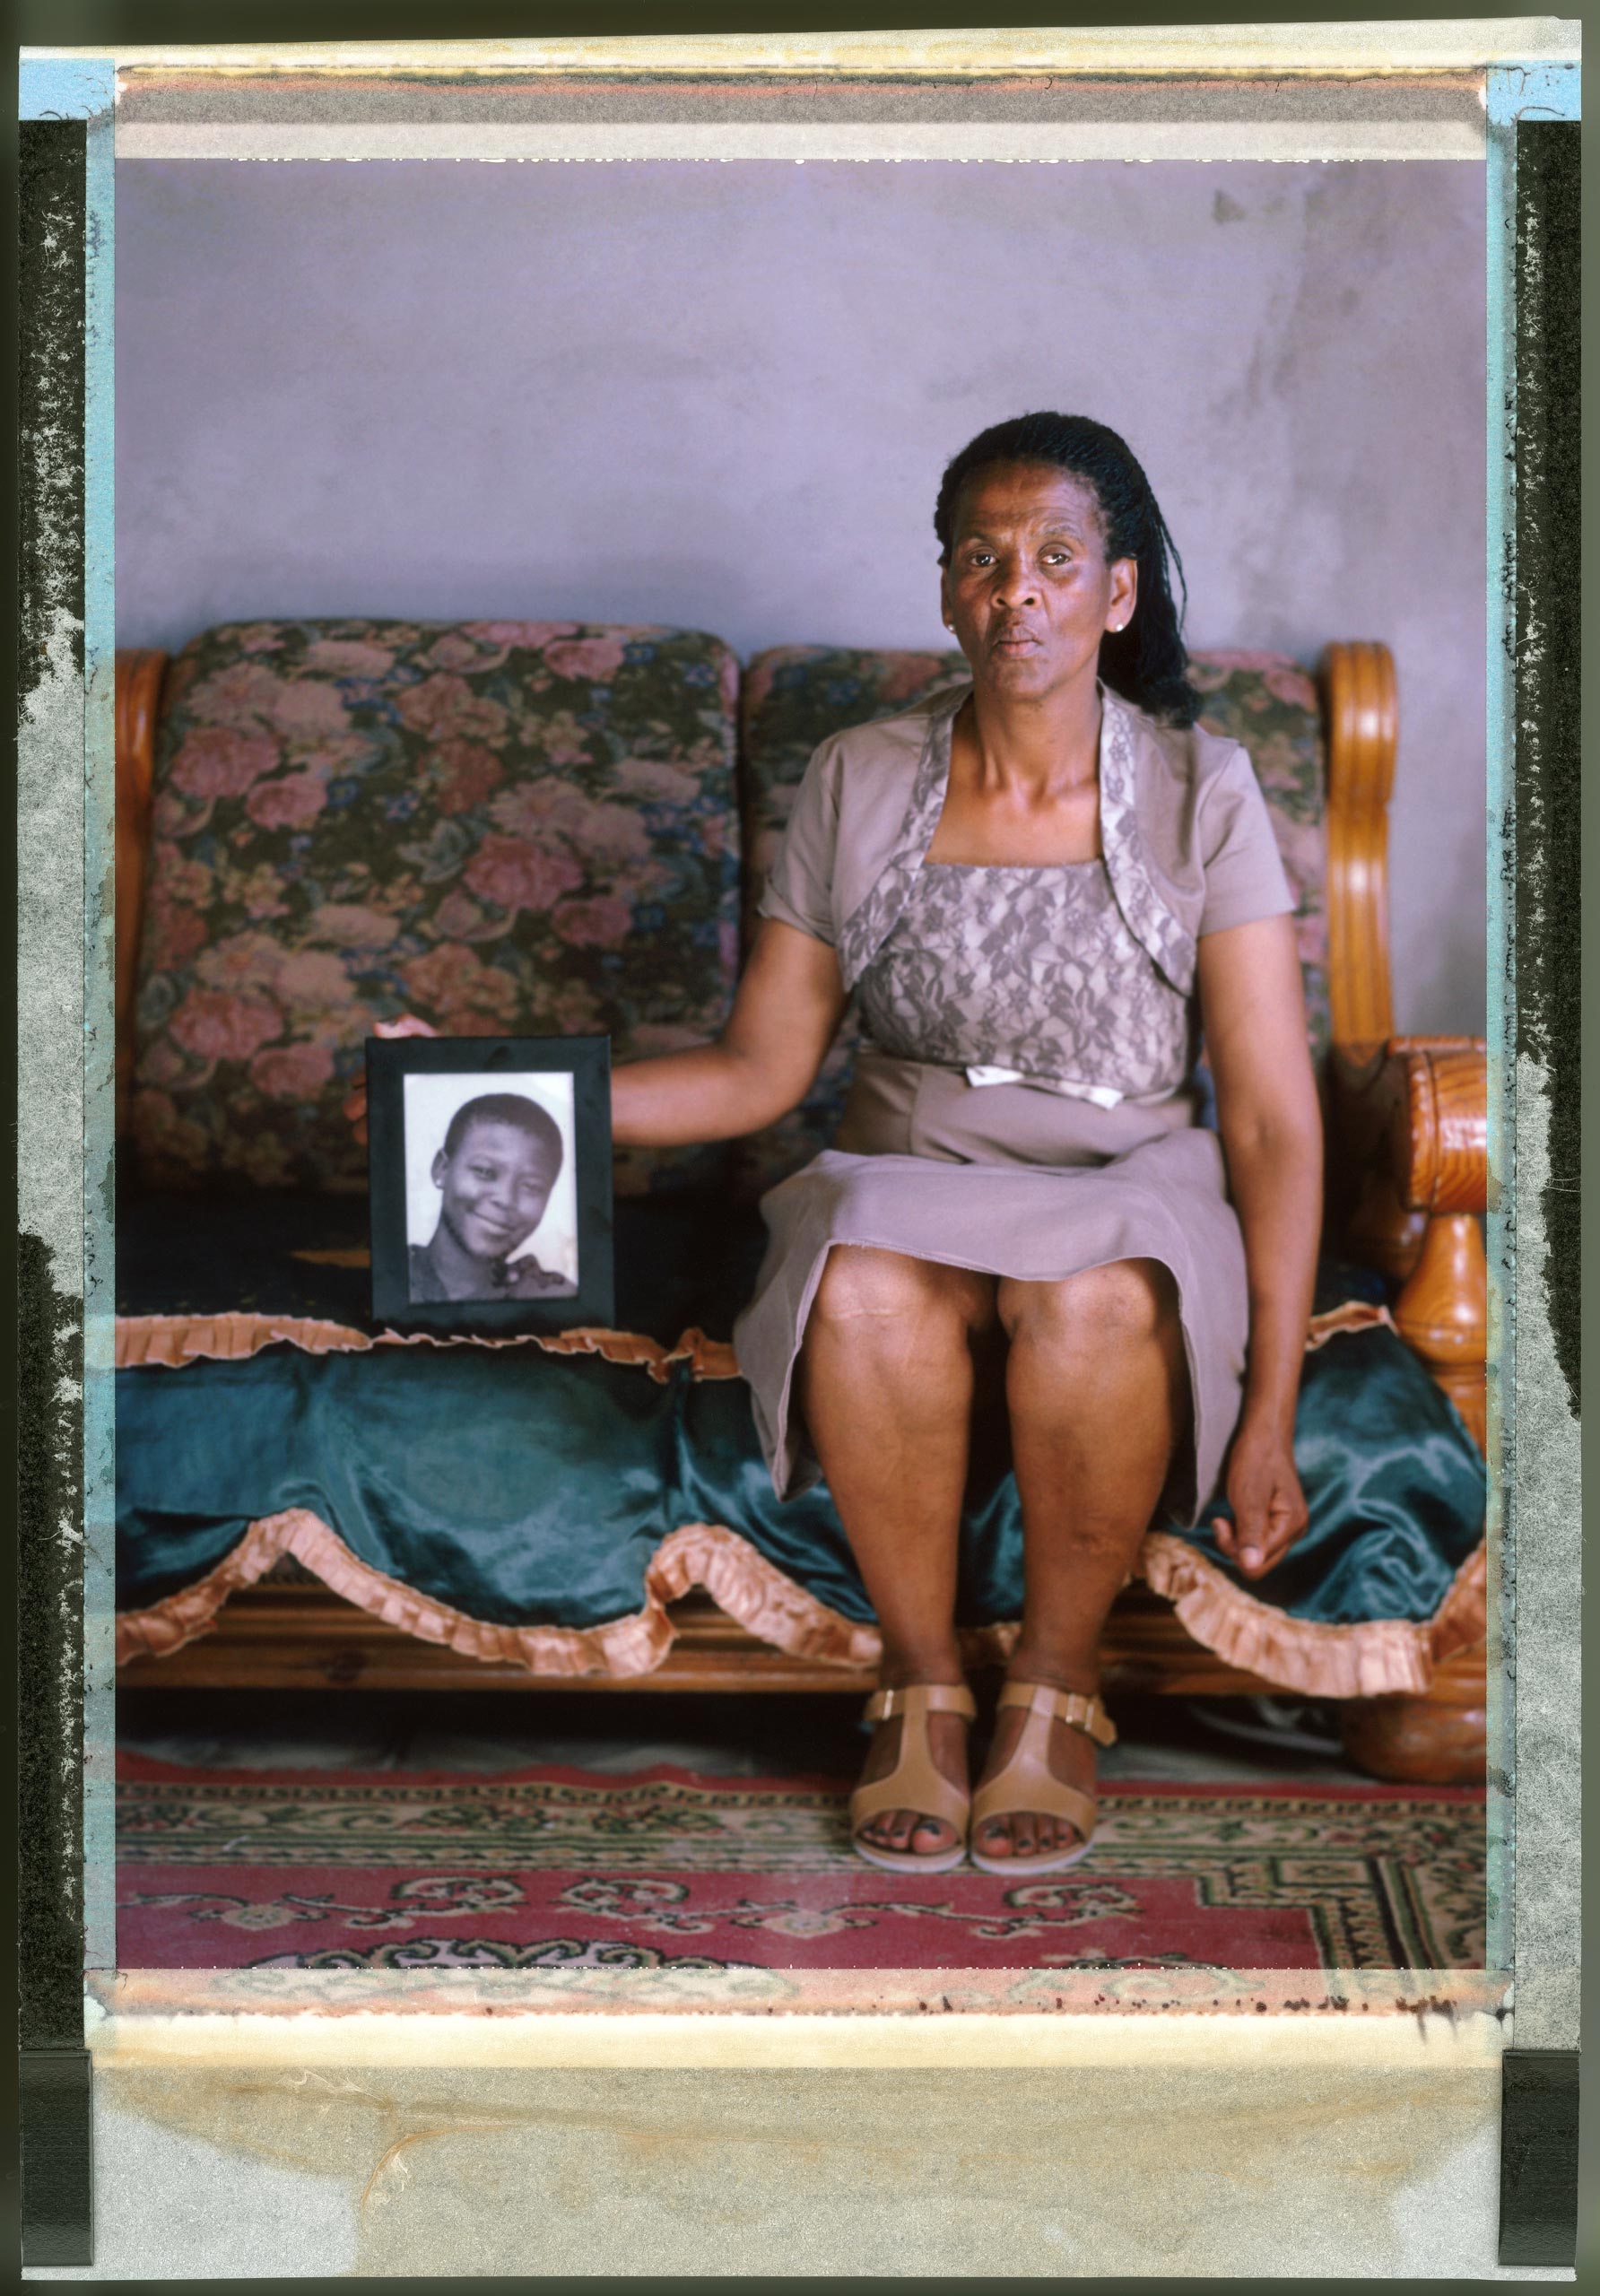 A posed portrait of Boniwe Tyatyeka, mother of Nontsikelelo Tyatyeka (in the framed picture) who disappeared 7 September 2010. A year later, on 9 September 2011, her decomposed body was found in the dustbin of a neighbor. She had been raped, beaten on the head, and strangled to death. The killer (the neighbor whose dustbin in which her body was found) said he did it to change her – she was a lesbian. Cape Town, South Africa. November 2014.  While many countries around the world are legally recognizing same-sex relationships, individuals in nearly 80 countries face criminal sanctions for private consensual relations with another adult of the same sex. Violence and discrimination based on sexual orientation or gender expression is even more widespread. Africa is becoming the worst continent for Lesbian, Gay, Bi-sexual, Transgender, Queer, Inter-sex (LGBTQI) individuals. More than two thirds of African countries have laws criminalizing consensual same-sex acts. In some, homosexuality is punishable by death. In Nigeria new homophobic laws introduced in 2013 led to dramatic increase in attacks. Under Sharia Law, homosexuality is punishable by death, up to 50 lashes and six months in prison for woman; for men elsewhere, up to 14 years in prison. Same sex acts are illegal in Uganda. A discriminatory law was passed then struck down and homophobic attacks rose tenfold after the passage of the Anti-Homosexuality Act. In Cameroon it is also illegal. More cases against suspected homosexuals are brought here than any other African country. In stark contrast with the rest of the continent, same sex relationships are legal in South Africa. The country has the most liberal laws toward gays and lesbians on the continent, with a constitution guaranteeing LBGTQI rights. Because of this, LGBTQI Africans from all over the continent fleeing persecution have come to South Africa. Despite these laws, many lesbians have been victims of ‘corrective rape’ and homosexuals have been murde